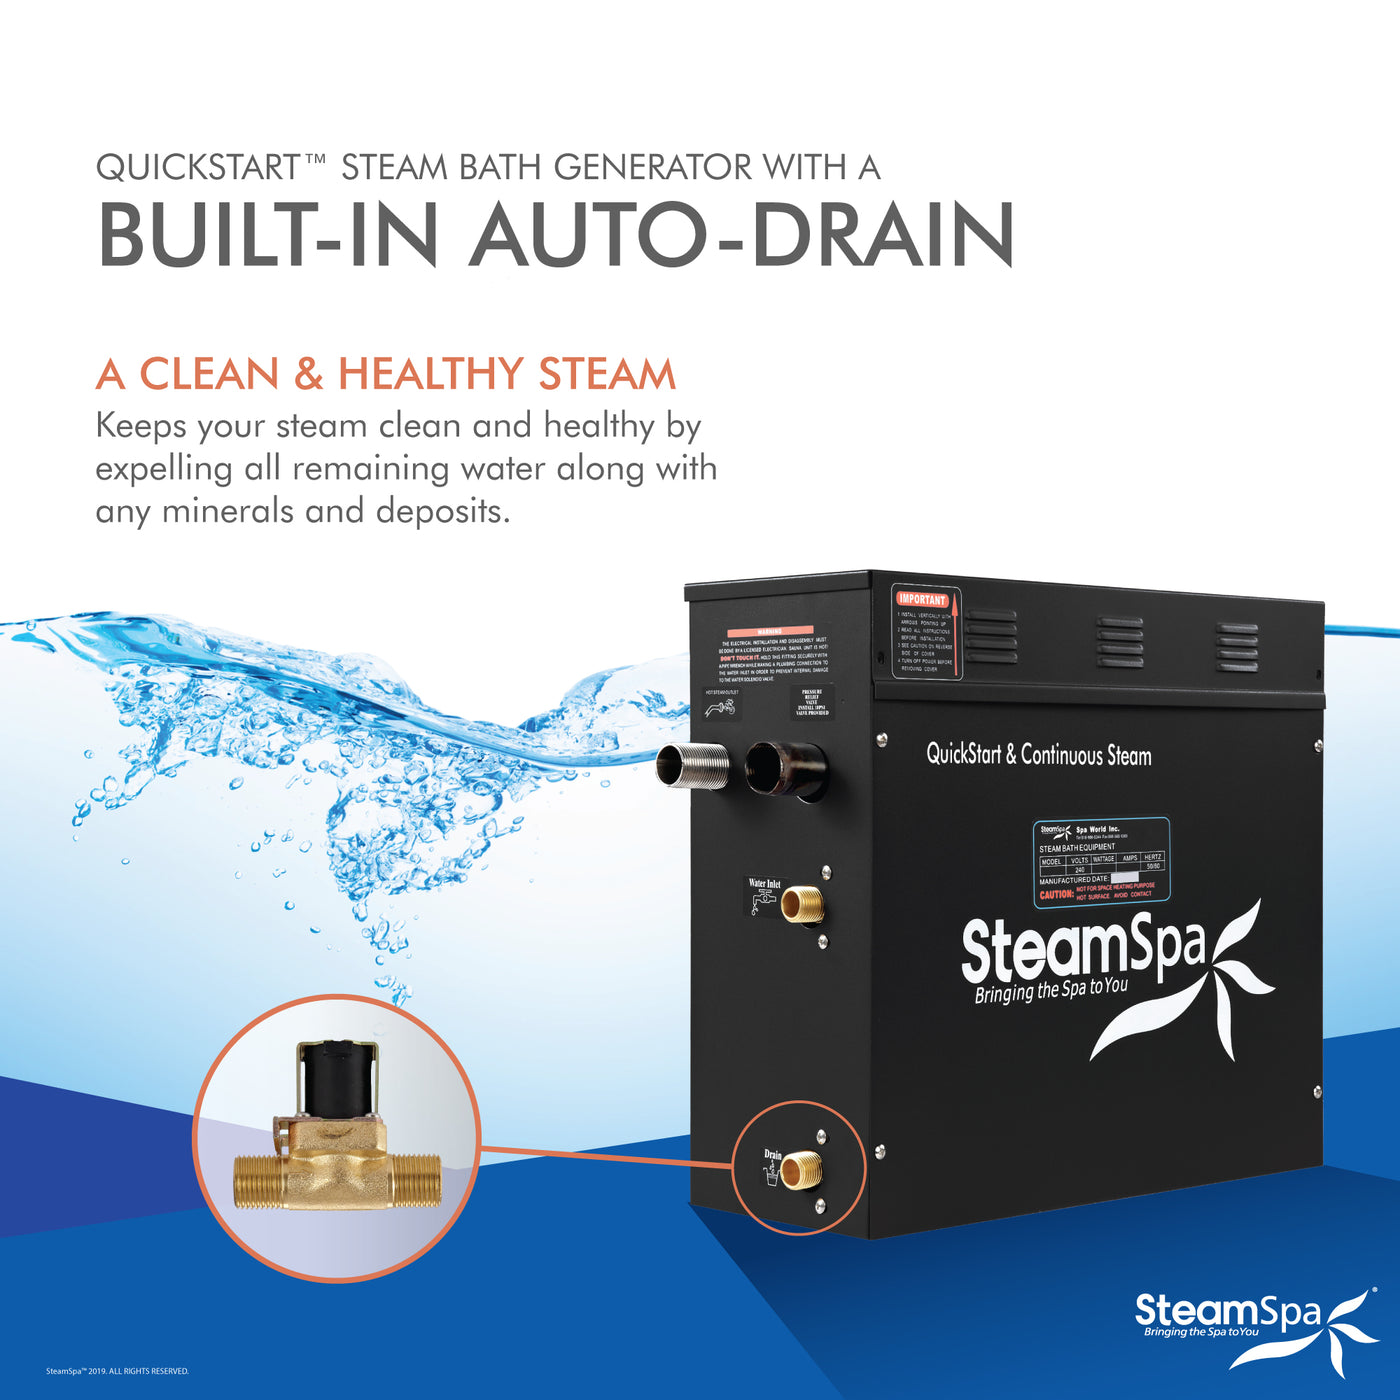 Black Series WiFi and Bluetooth 2 x 7.5kW QuickStart Steam Bath Generator Package with Dual Aroma Pump in Gold BKT1500GD-ADP